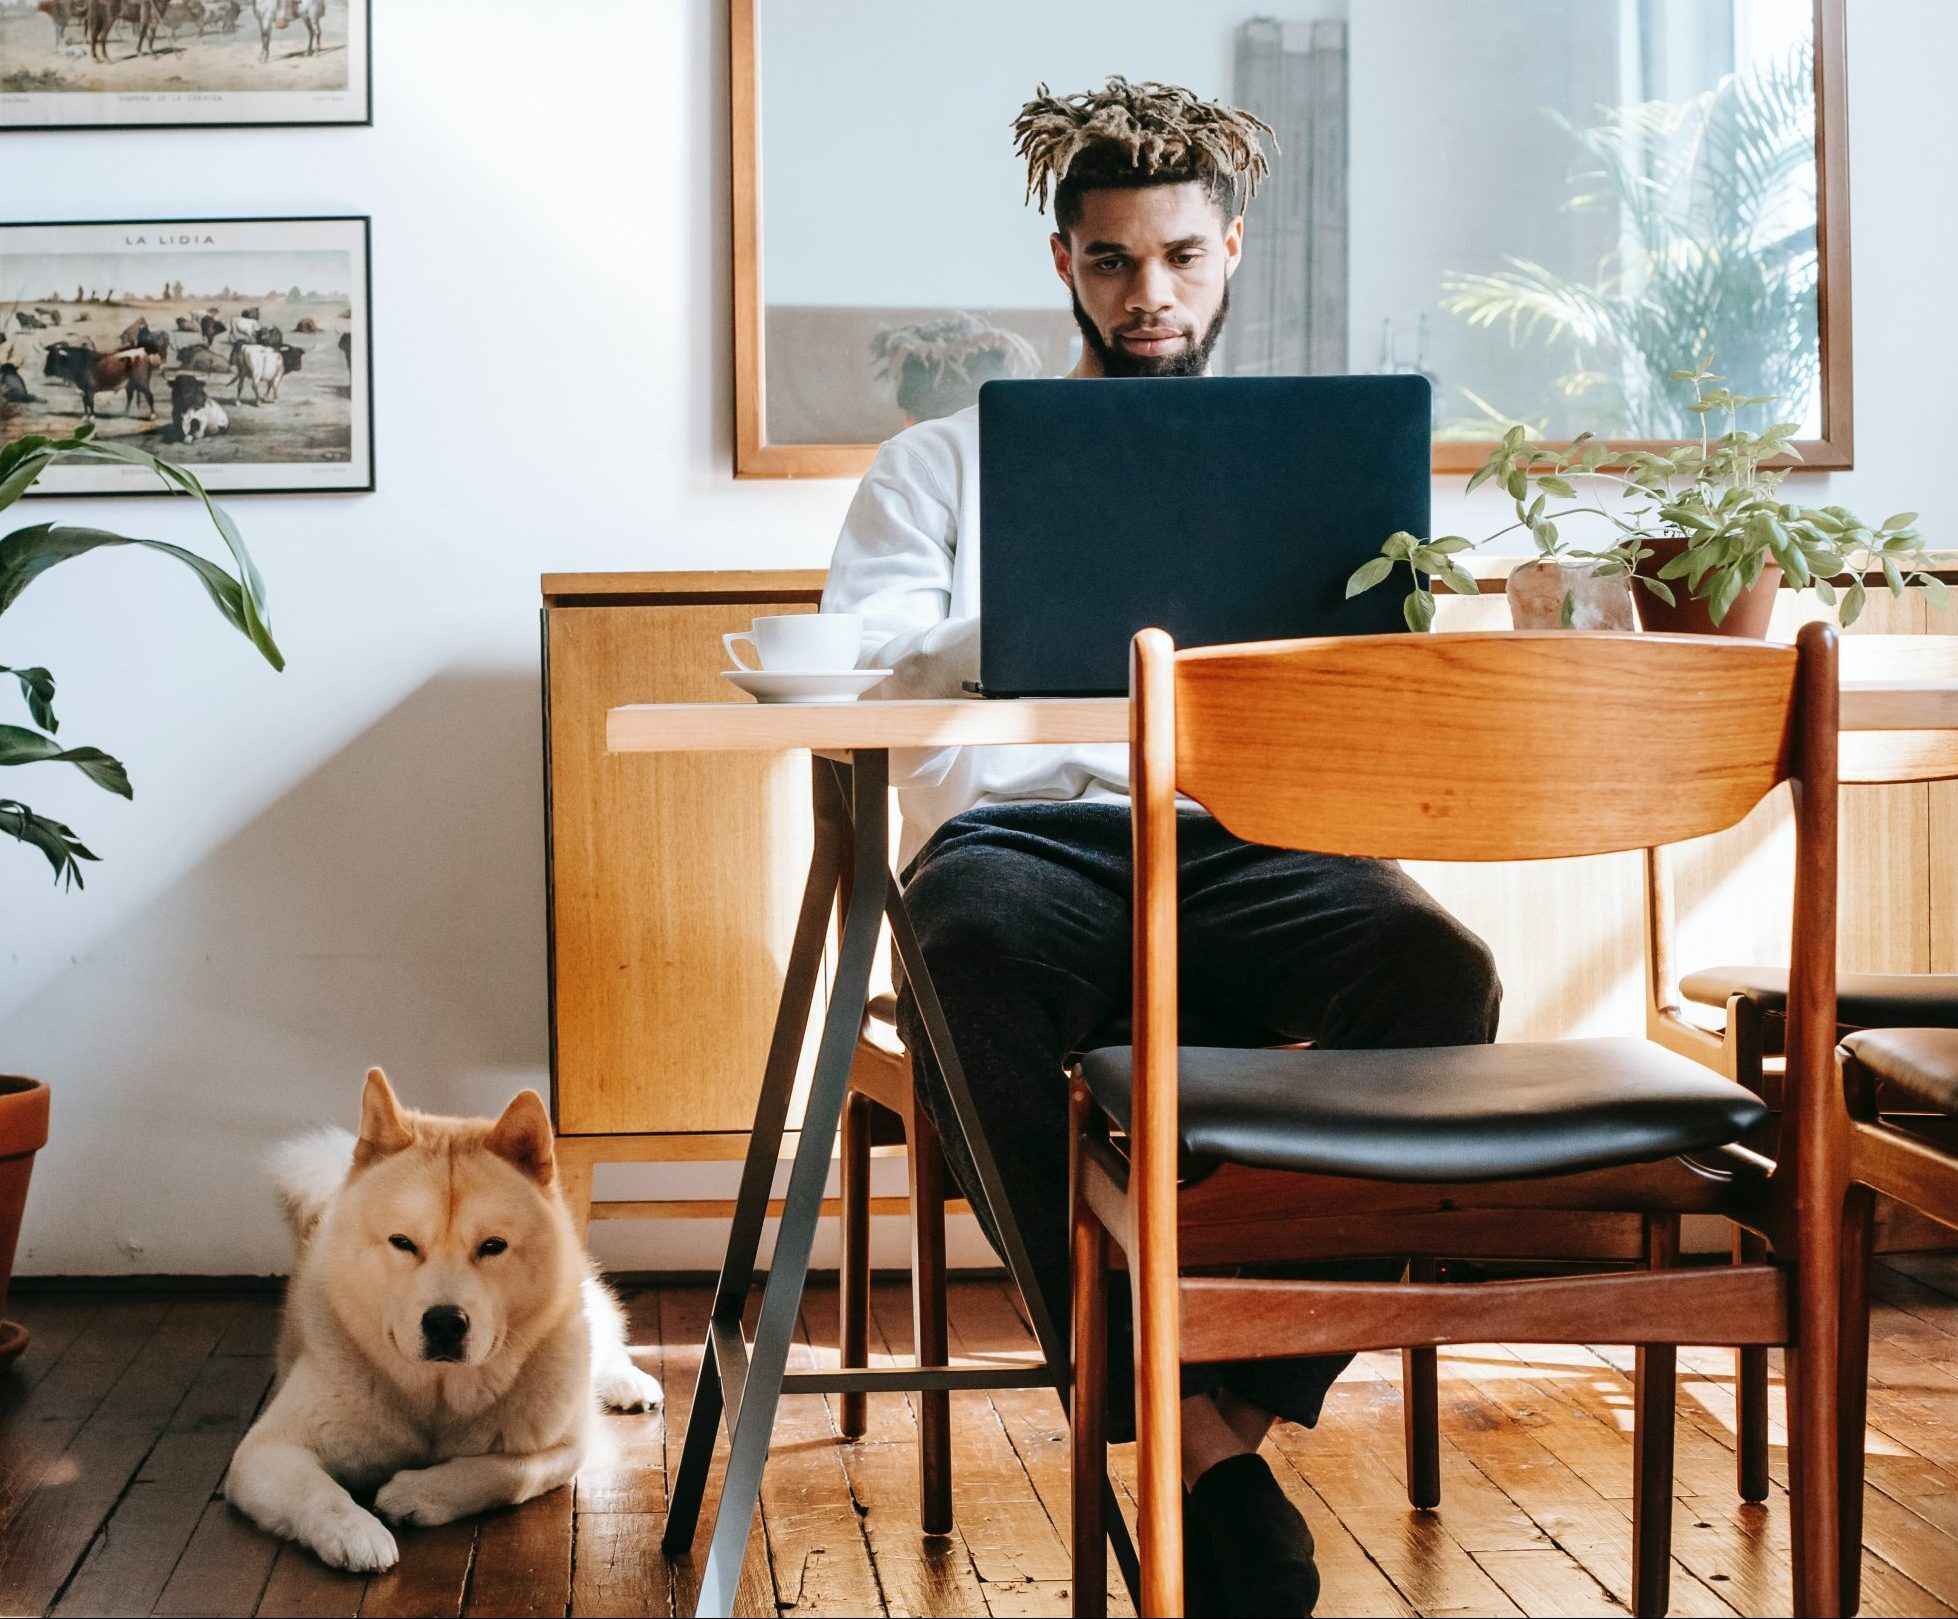 Man on laptop with dog